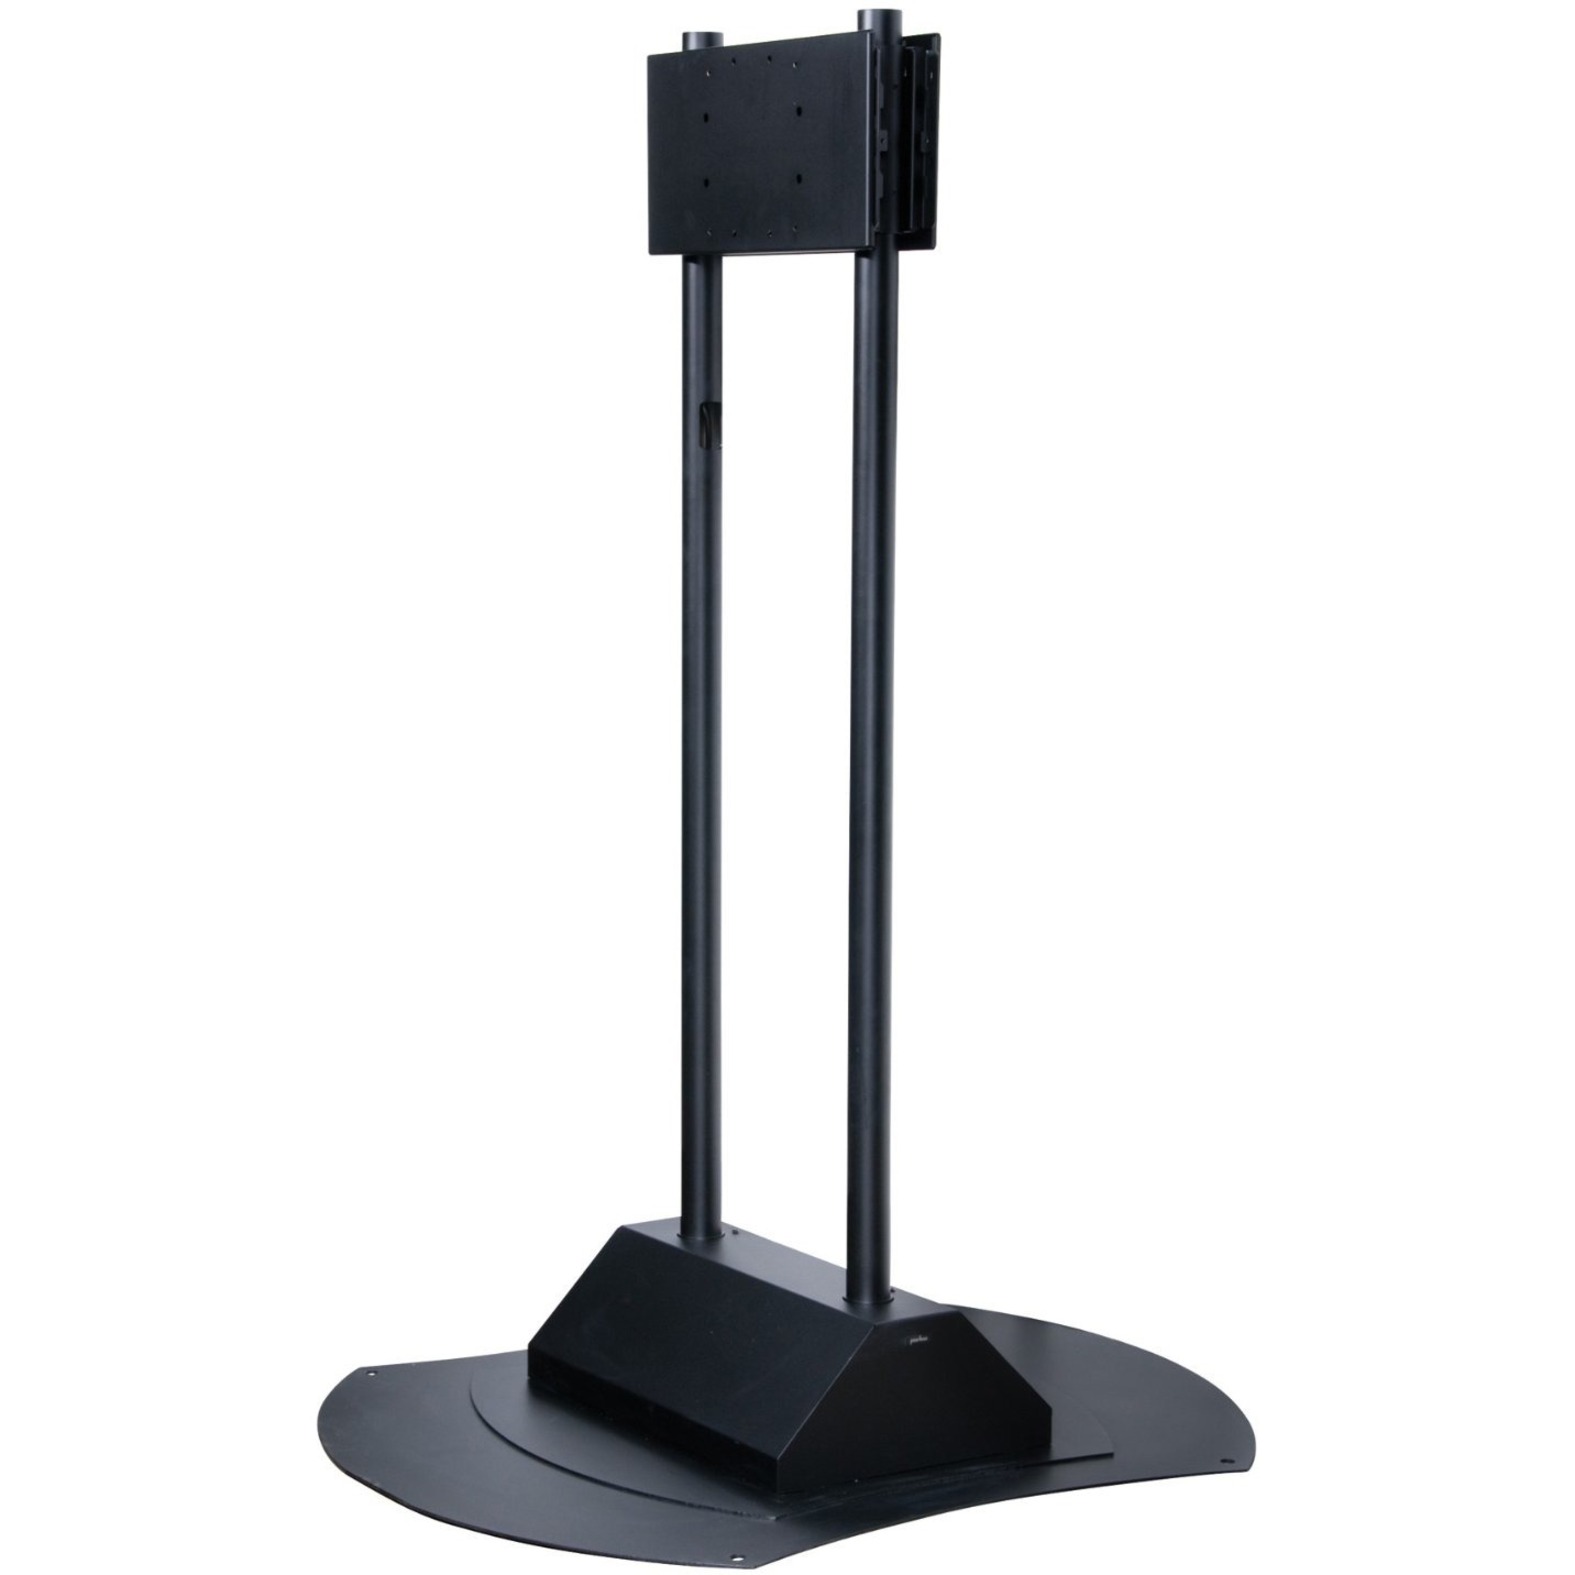 Peerless FPZ-670 Stand For Flat Panels - image 1 of 3